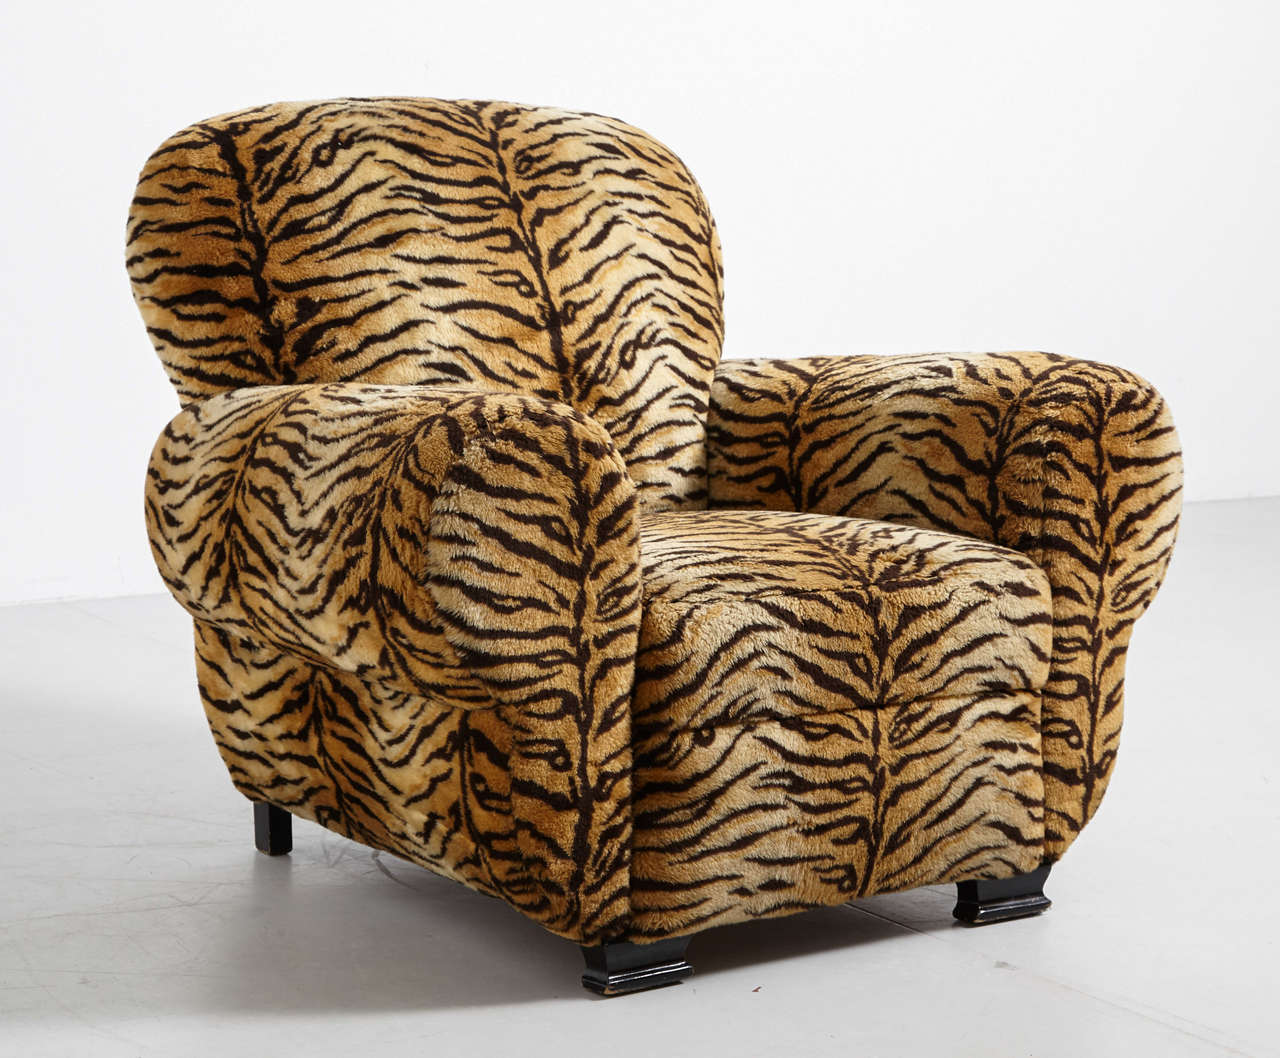 French Art Deco chair, upholstery tiger print fabric, restored in 1990.